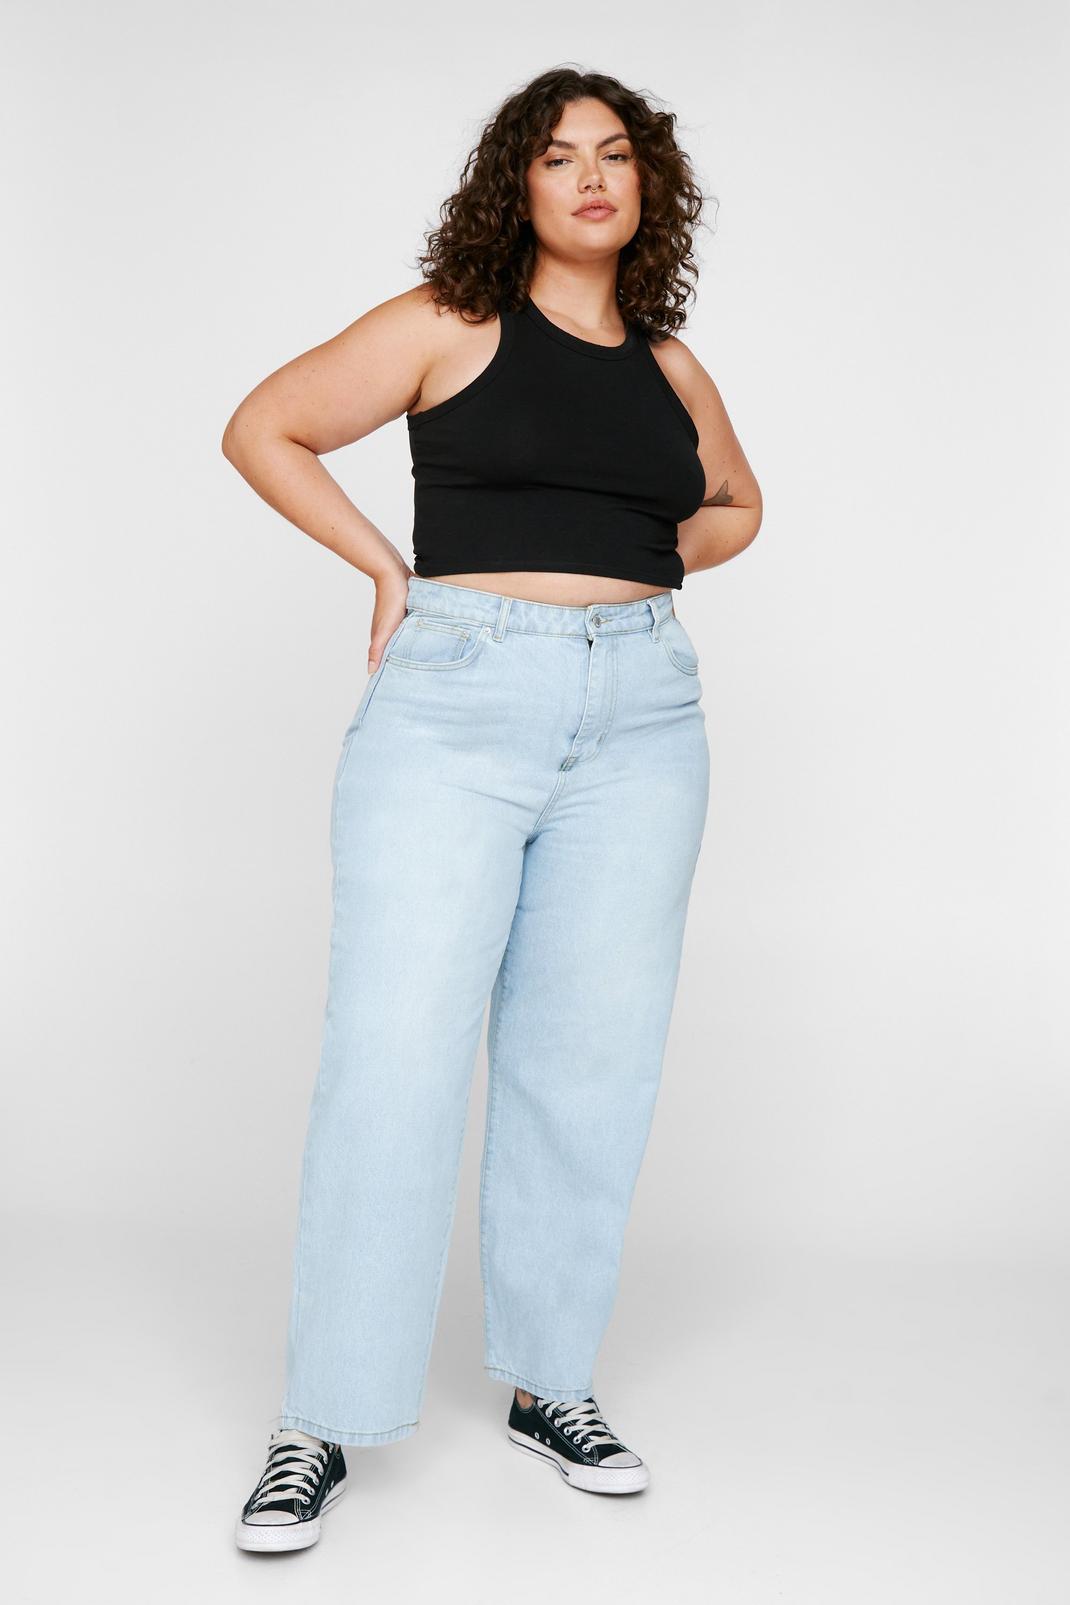 How to Style Baggy Jeans Plus Size